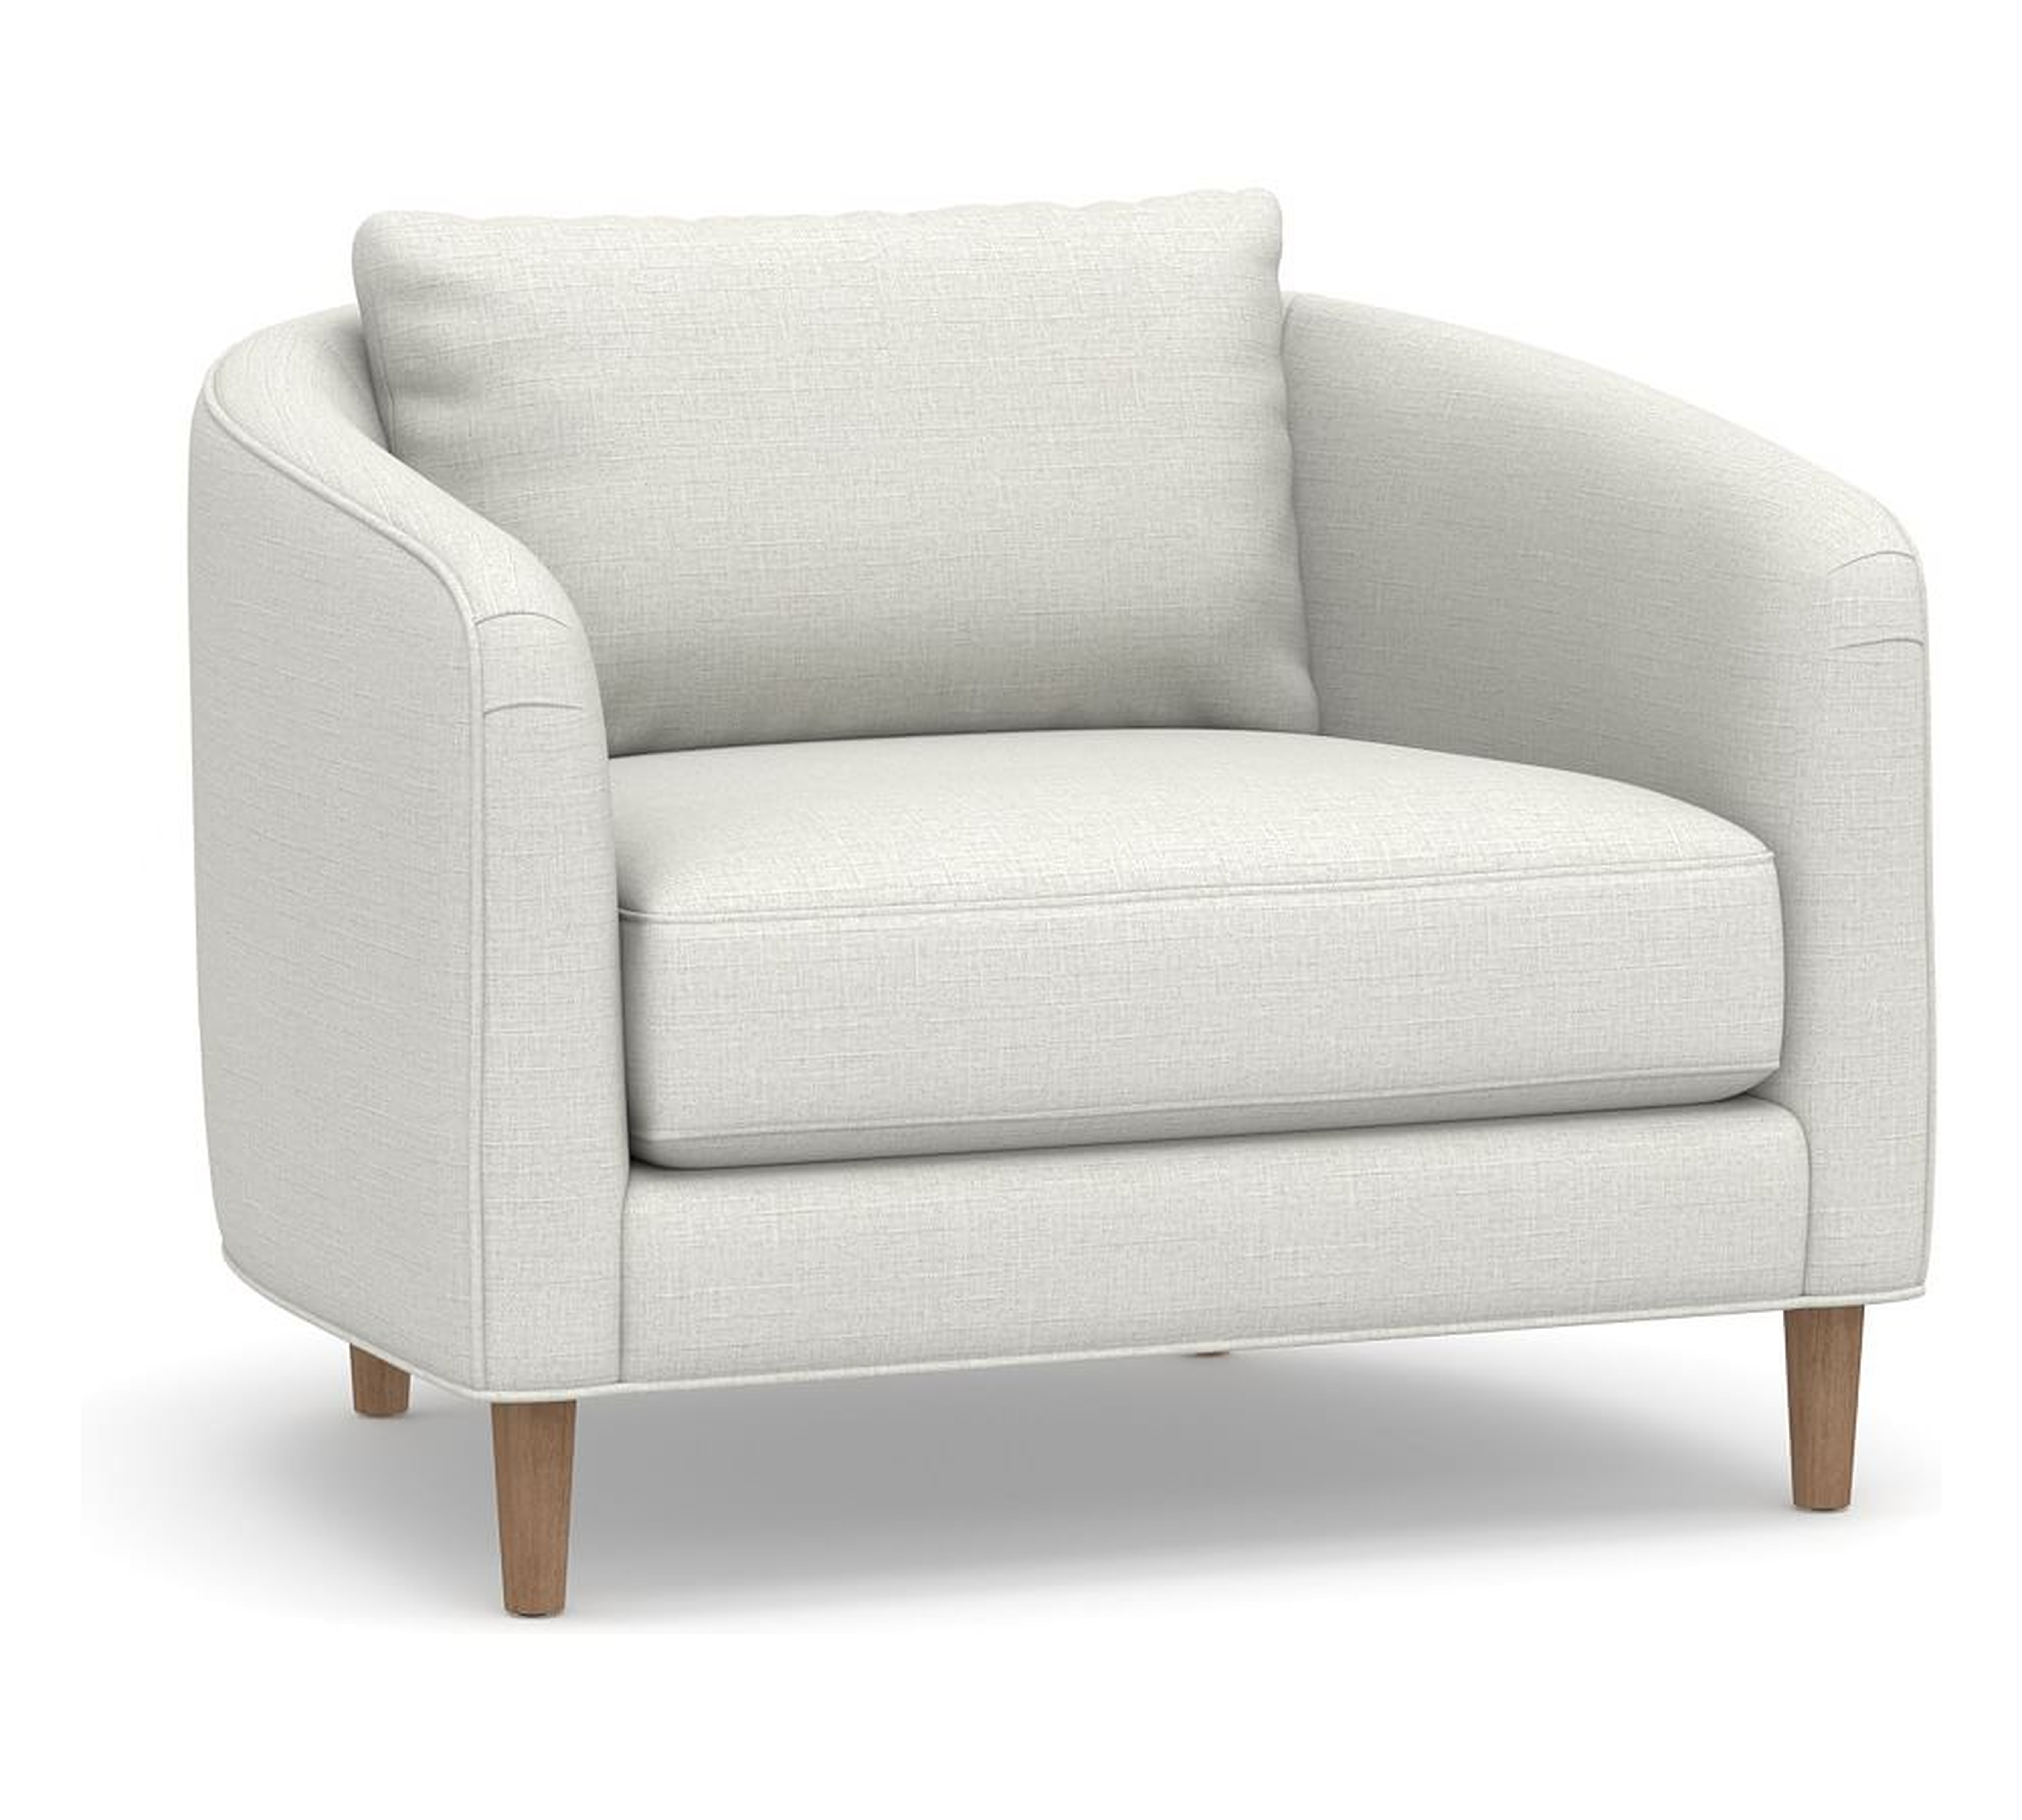 Remmy Upholstered Armchair, Polyester Wrapped Cushions, Basketweave Slub Ivory - Pottery Barn